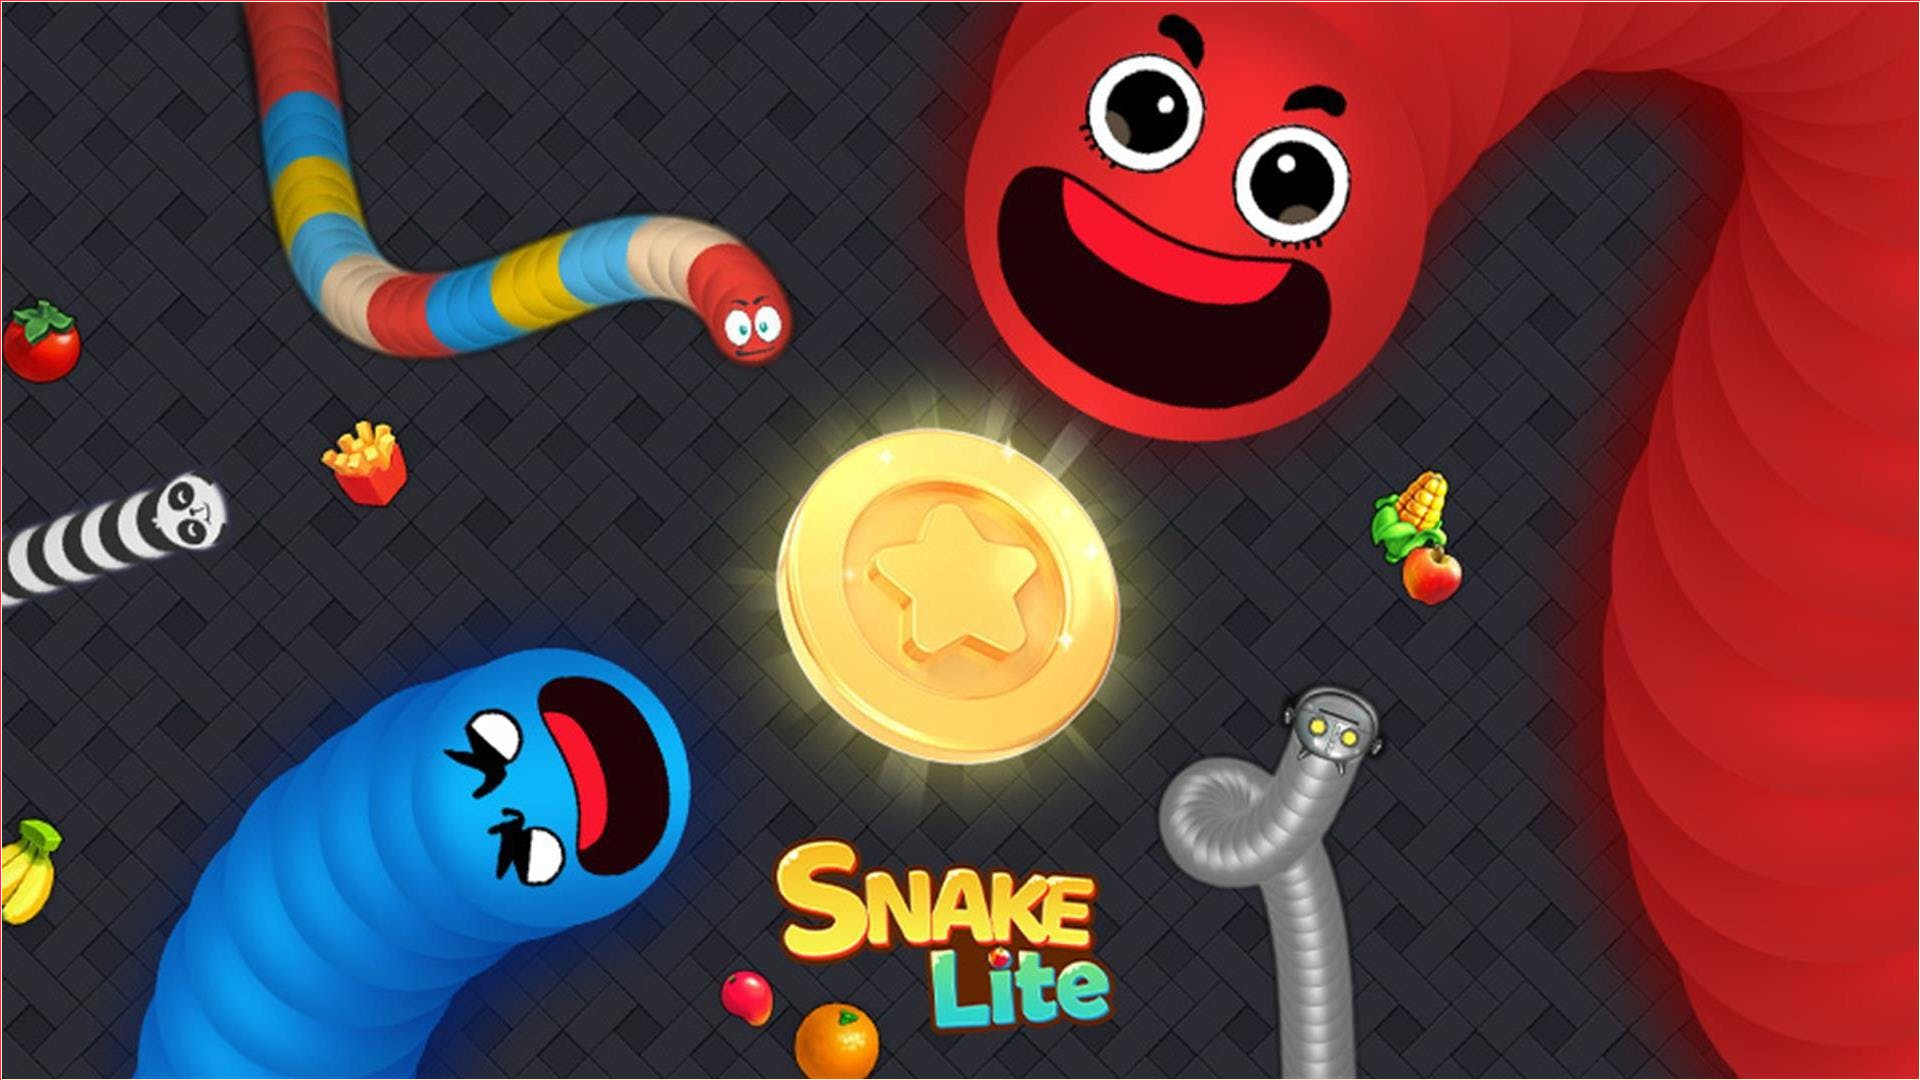 Sneak io - Worm/Snake slither .io games::Appstore for Android